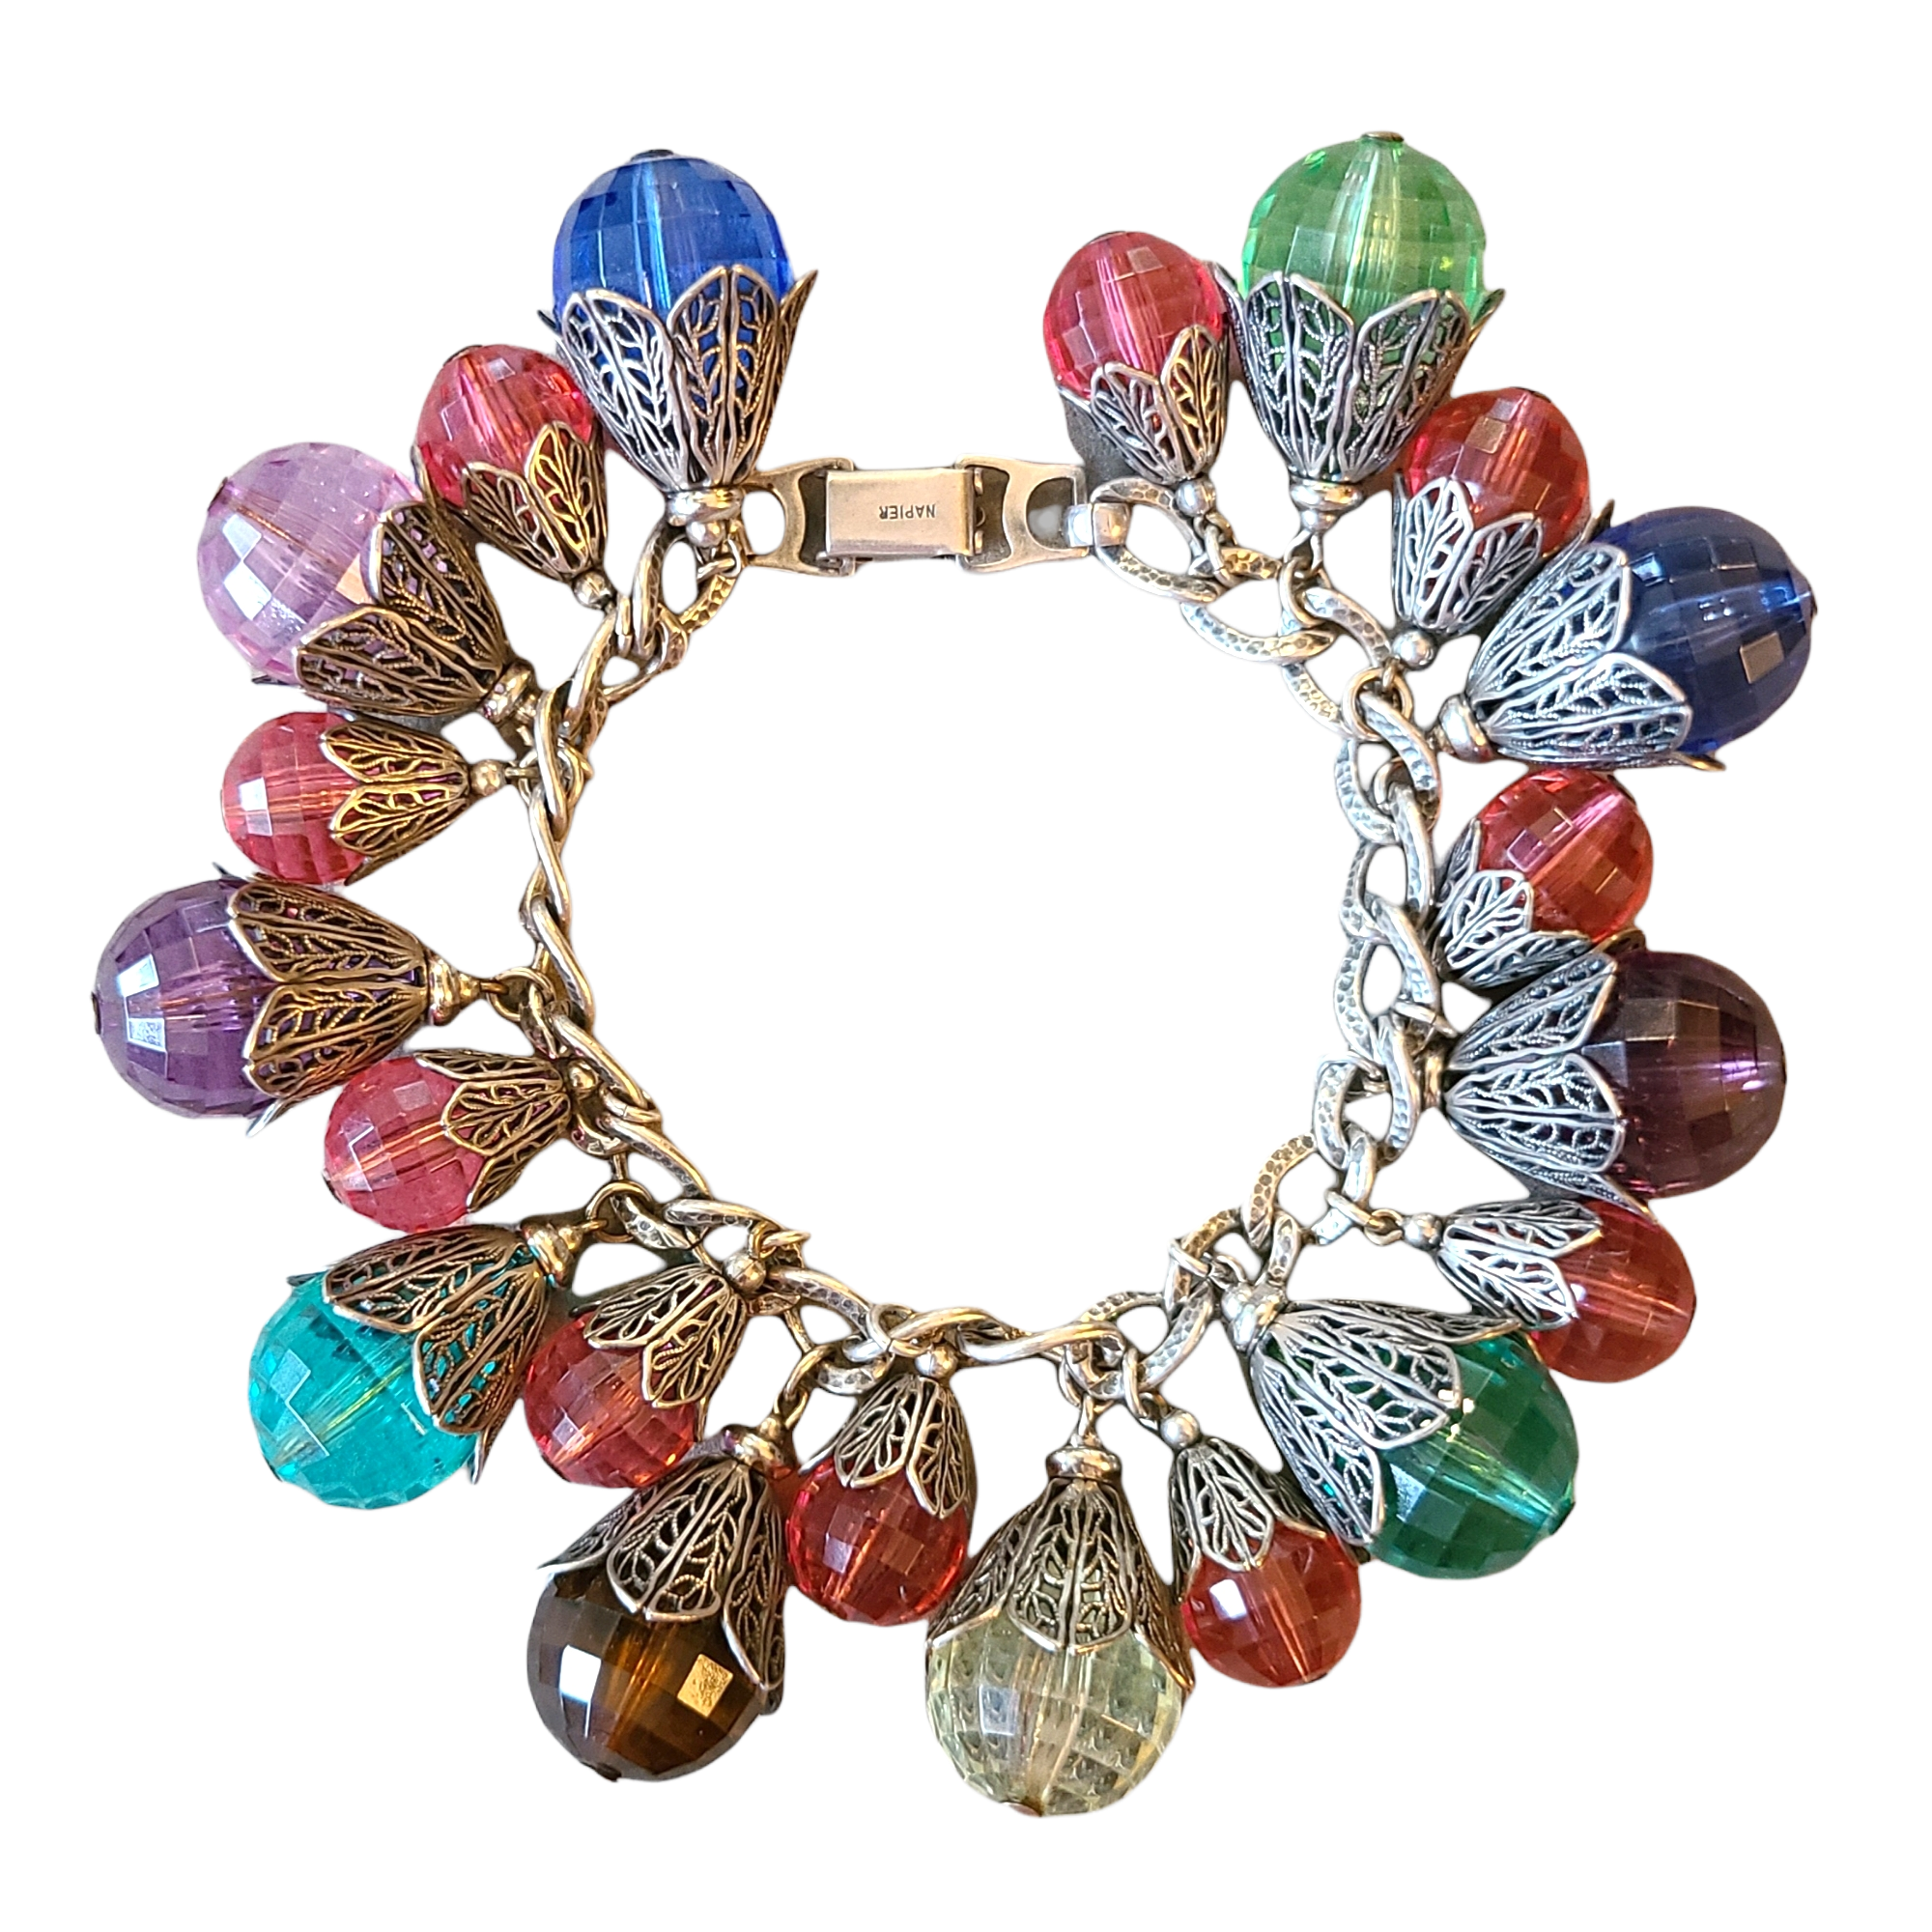 1950s Napier Filigree and Plastic Faceted Beads Bracelet - East Indian Inspired